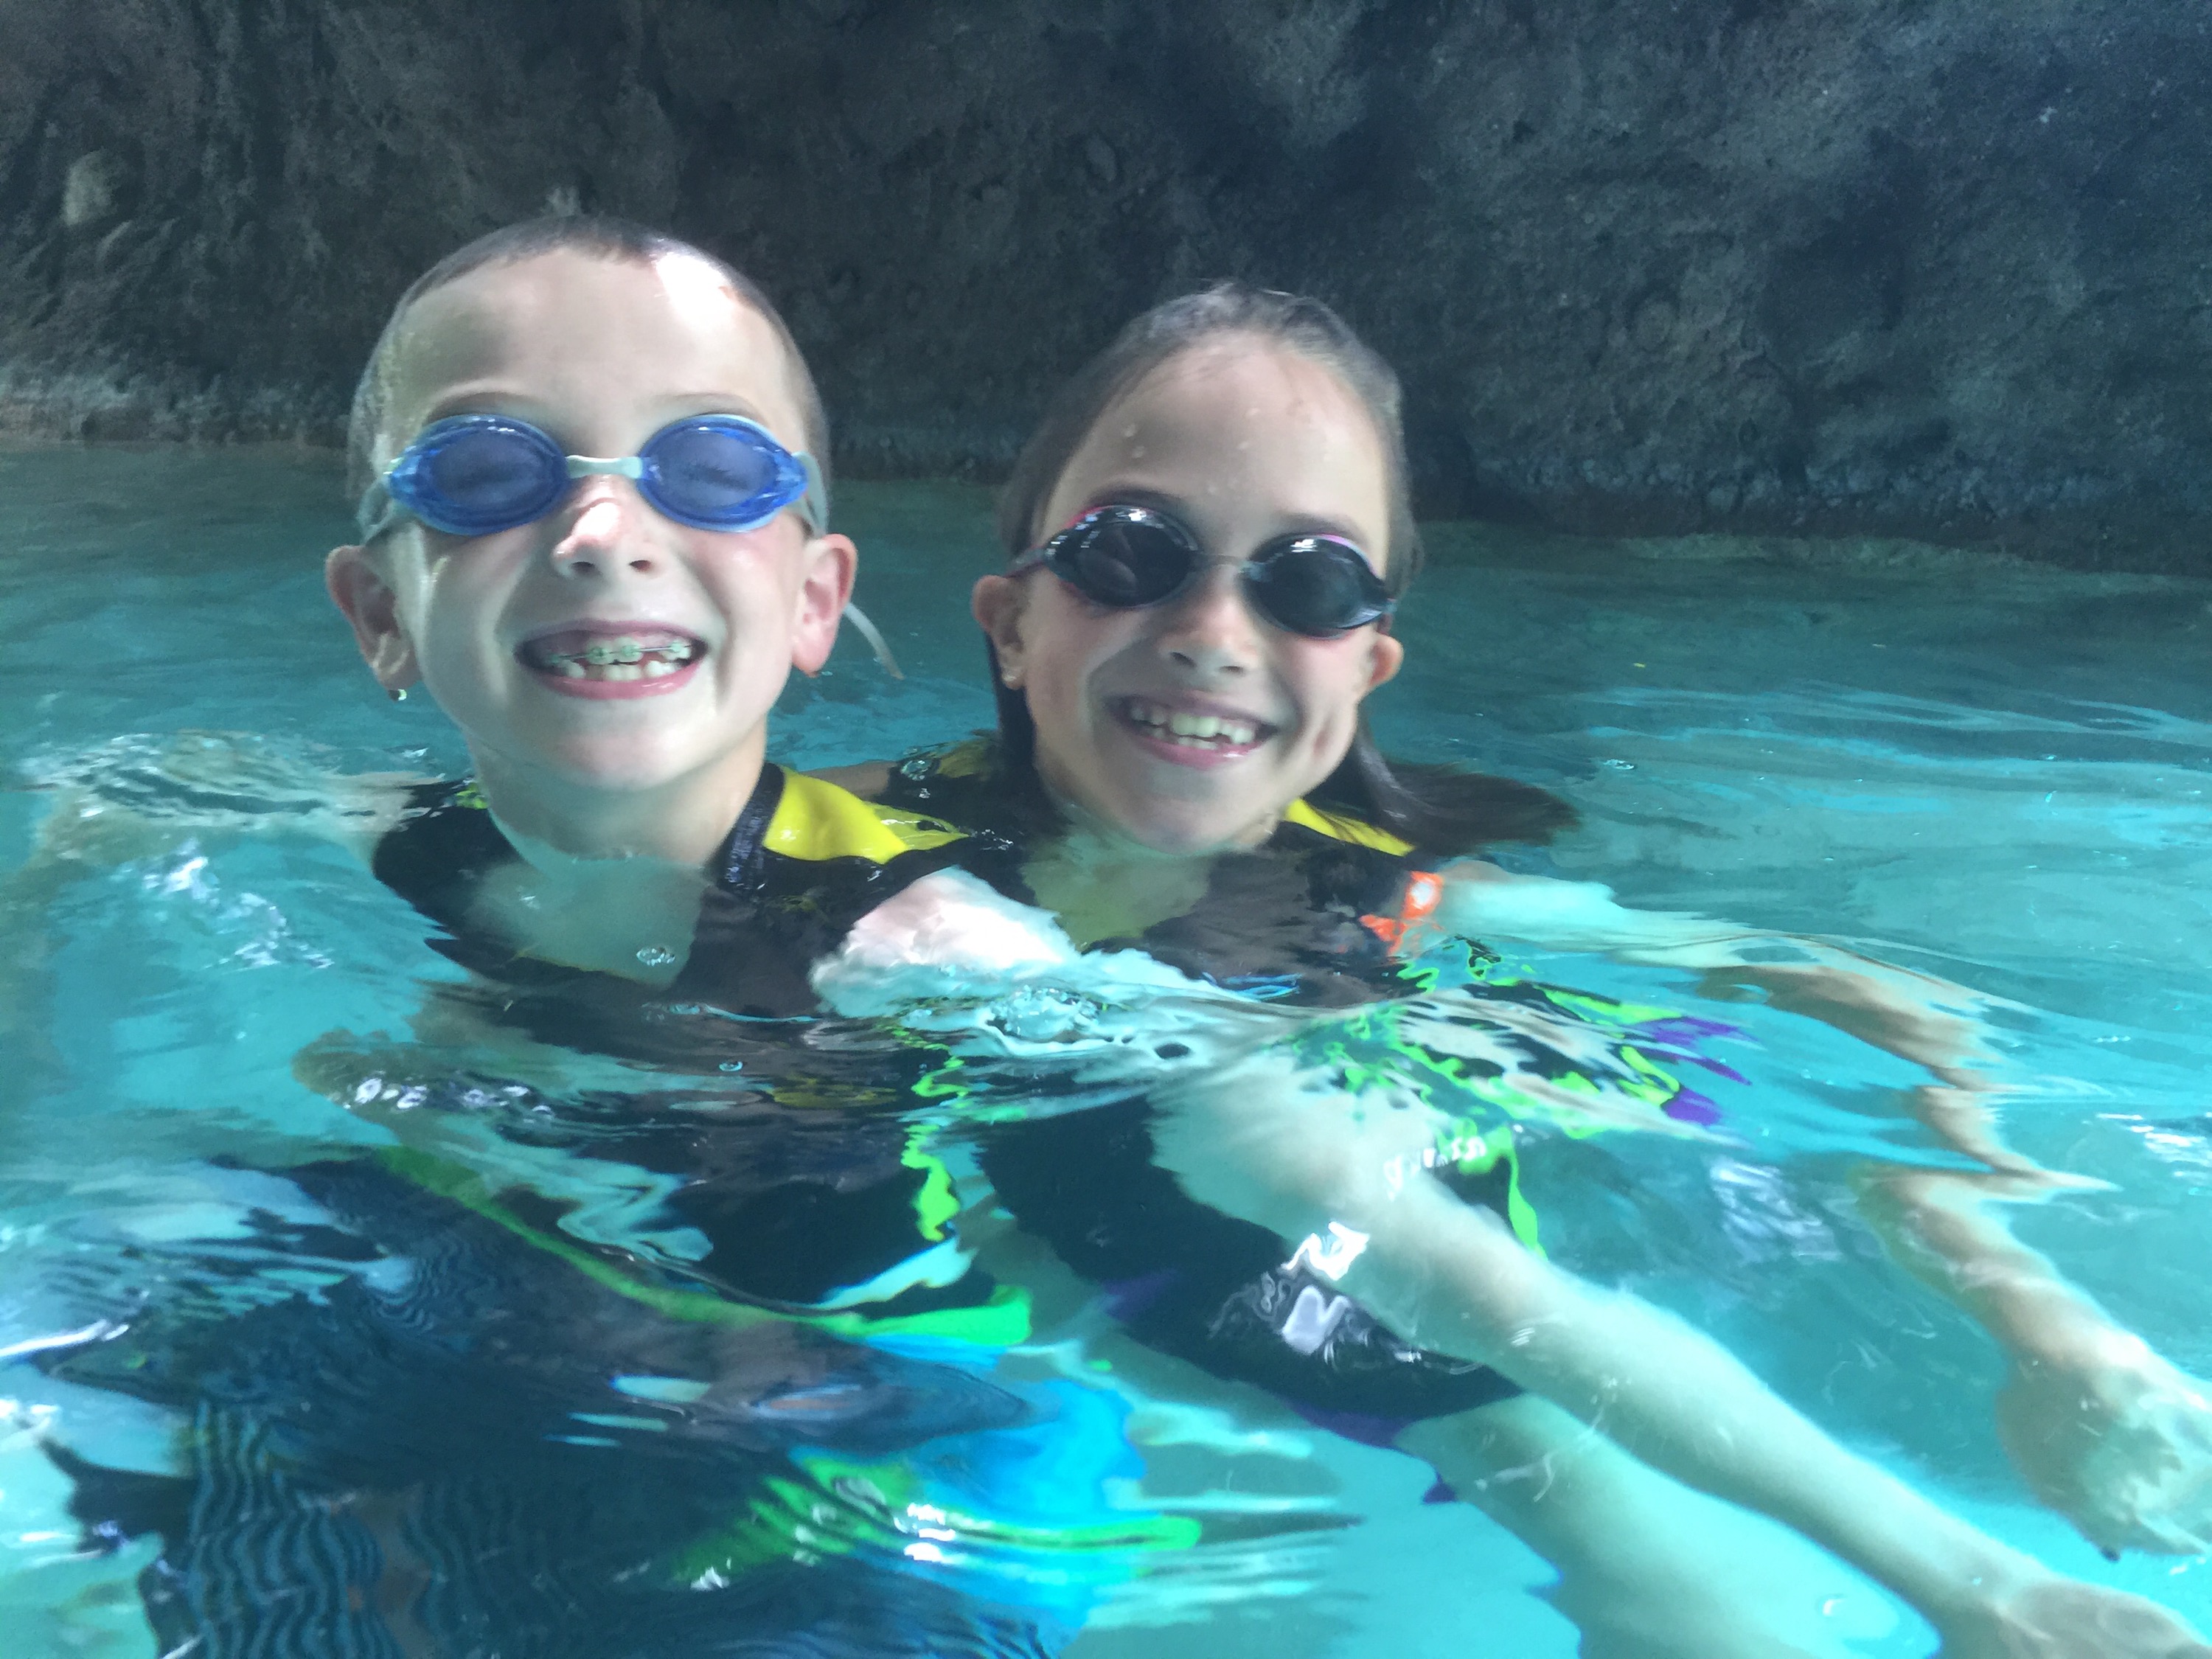 7 Reasons Why Visiting Discovery Cove Is Worth the Price